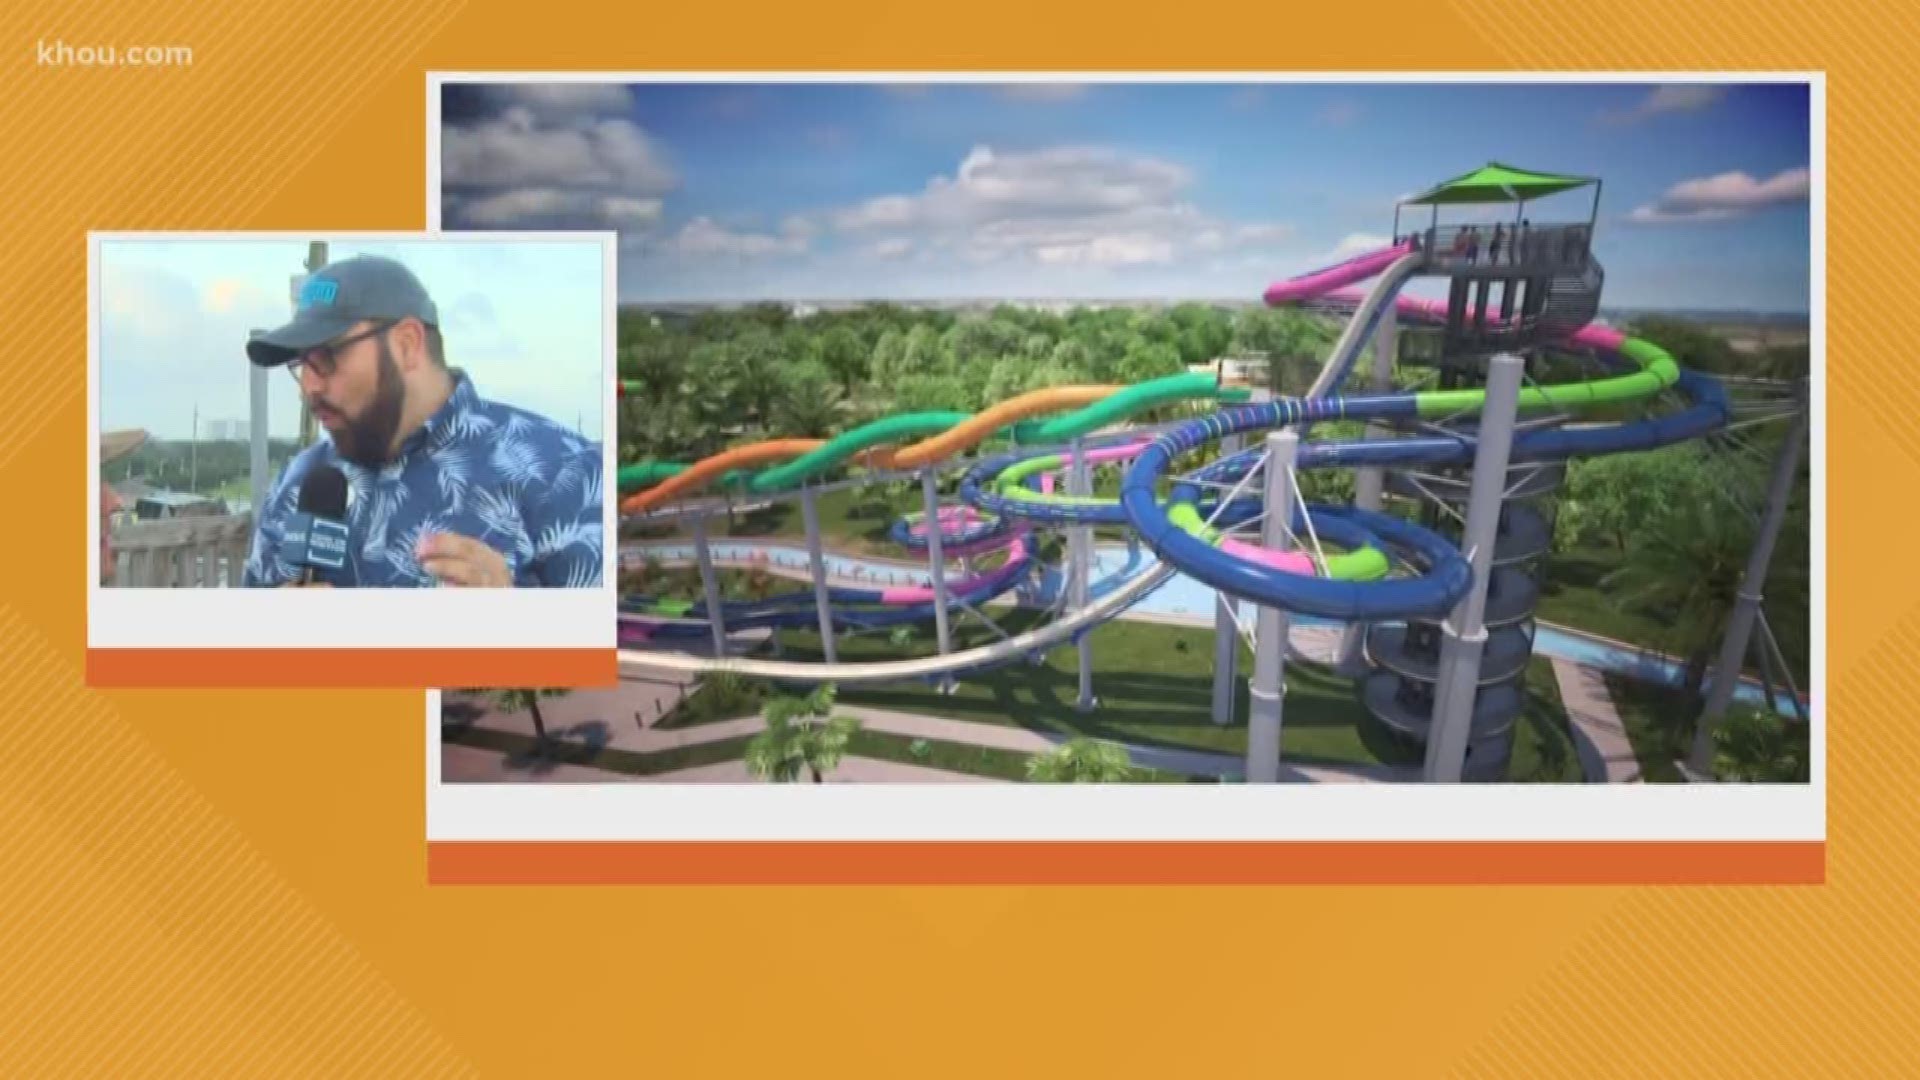 We are inching towards summer, and the kids are looking for things to do! It's not officially summer yet but it's heating up outside. Why not cool off at Schlitterbahn for the holiday weekend? Ruben Galvan was live in Galveston Thursday morning